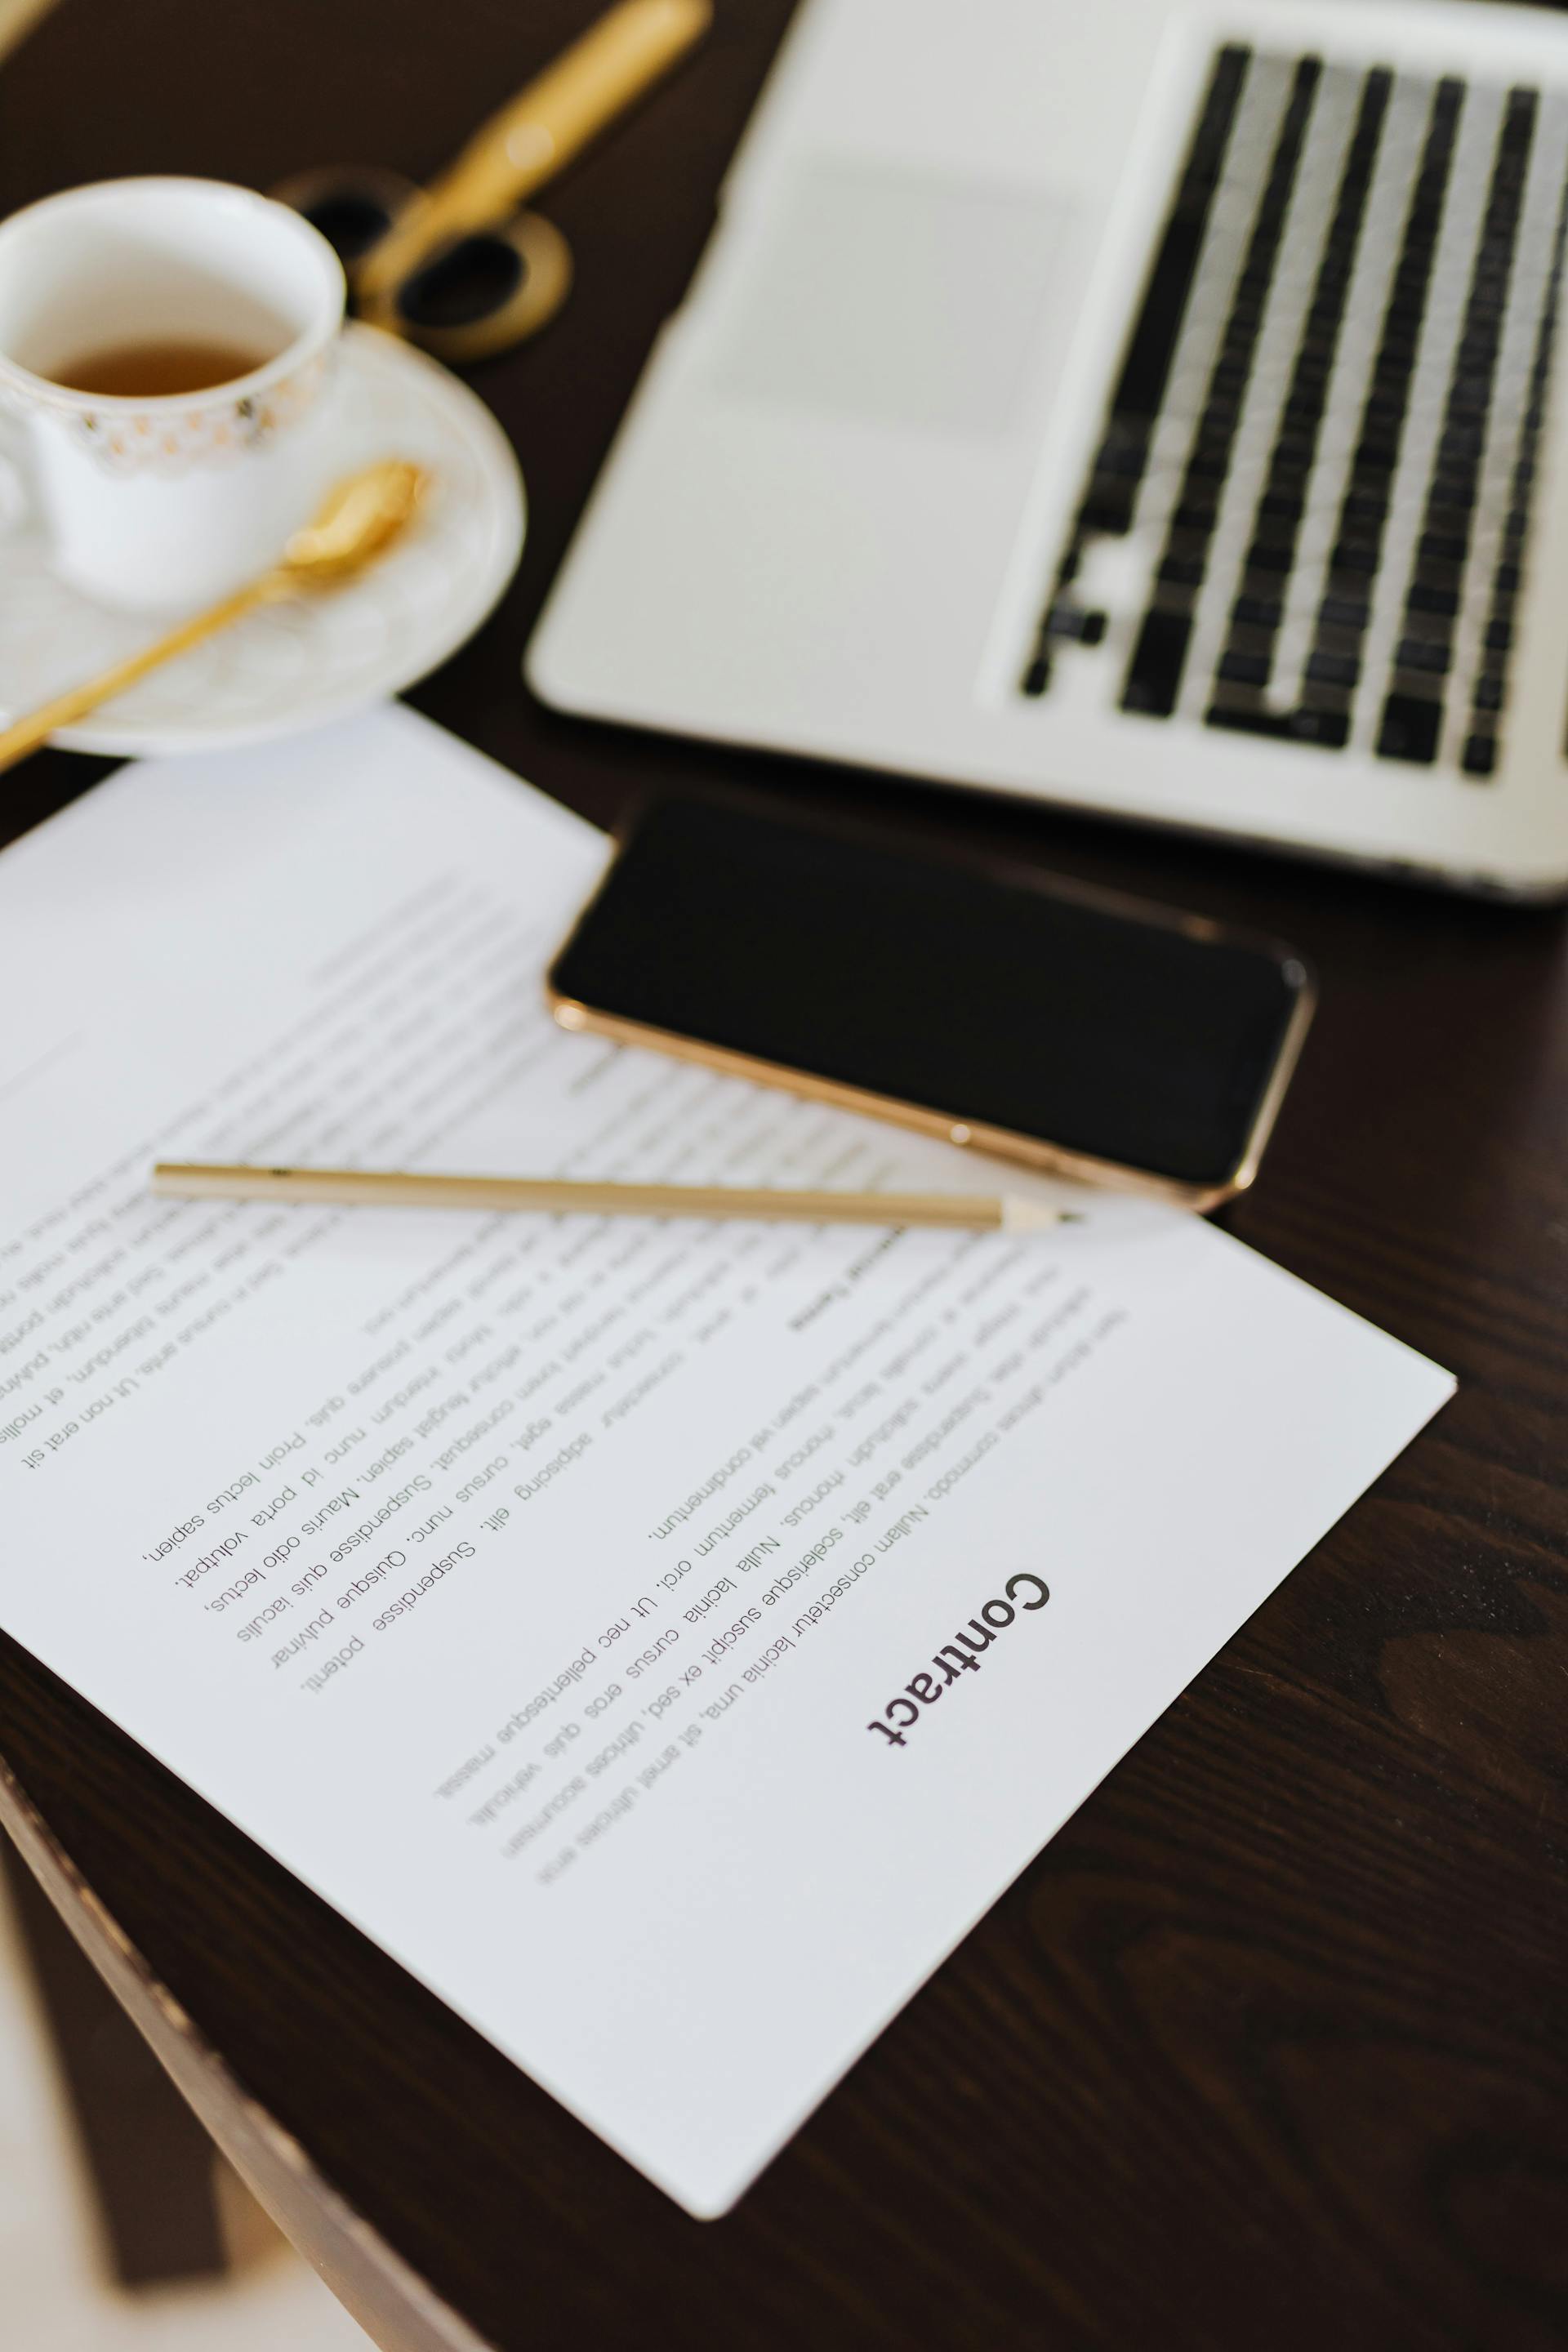 A contract paper lying on a table | Source: Pexels